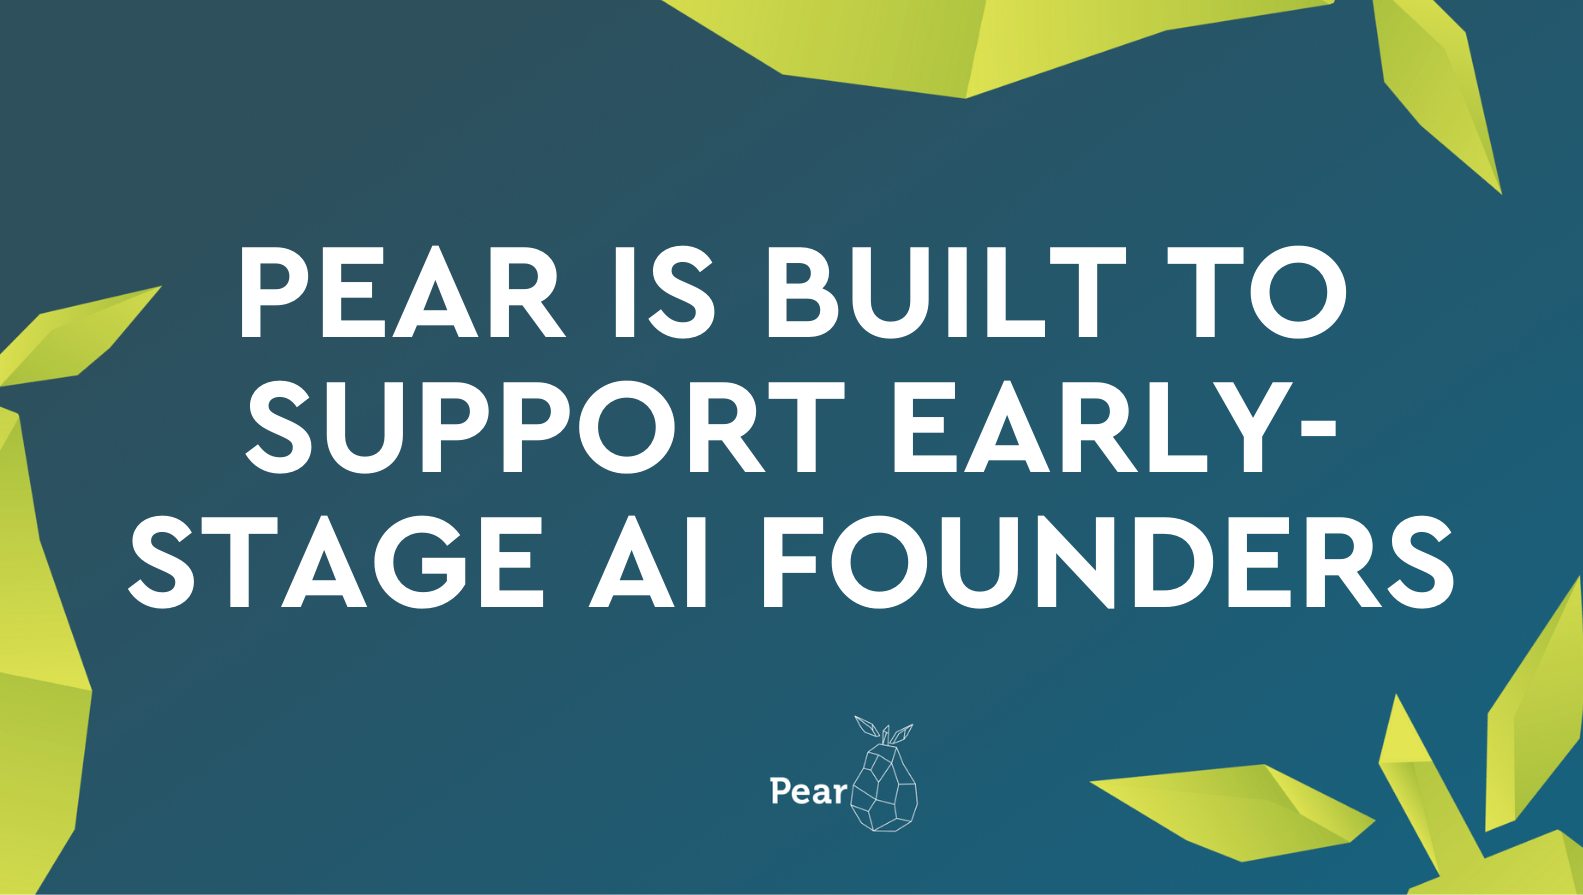 Pear is built to support early-stage AI founders